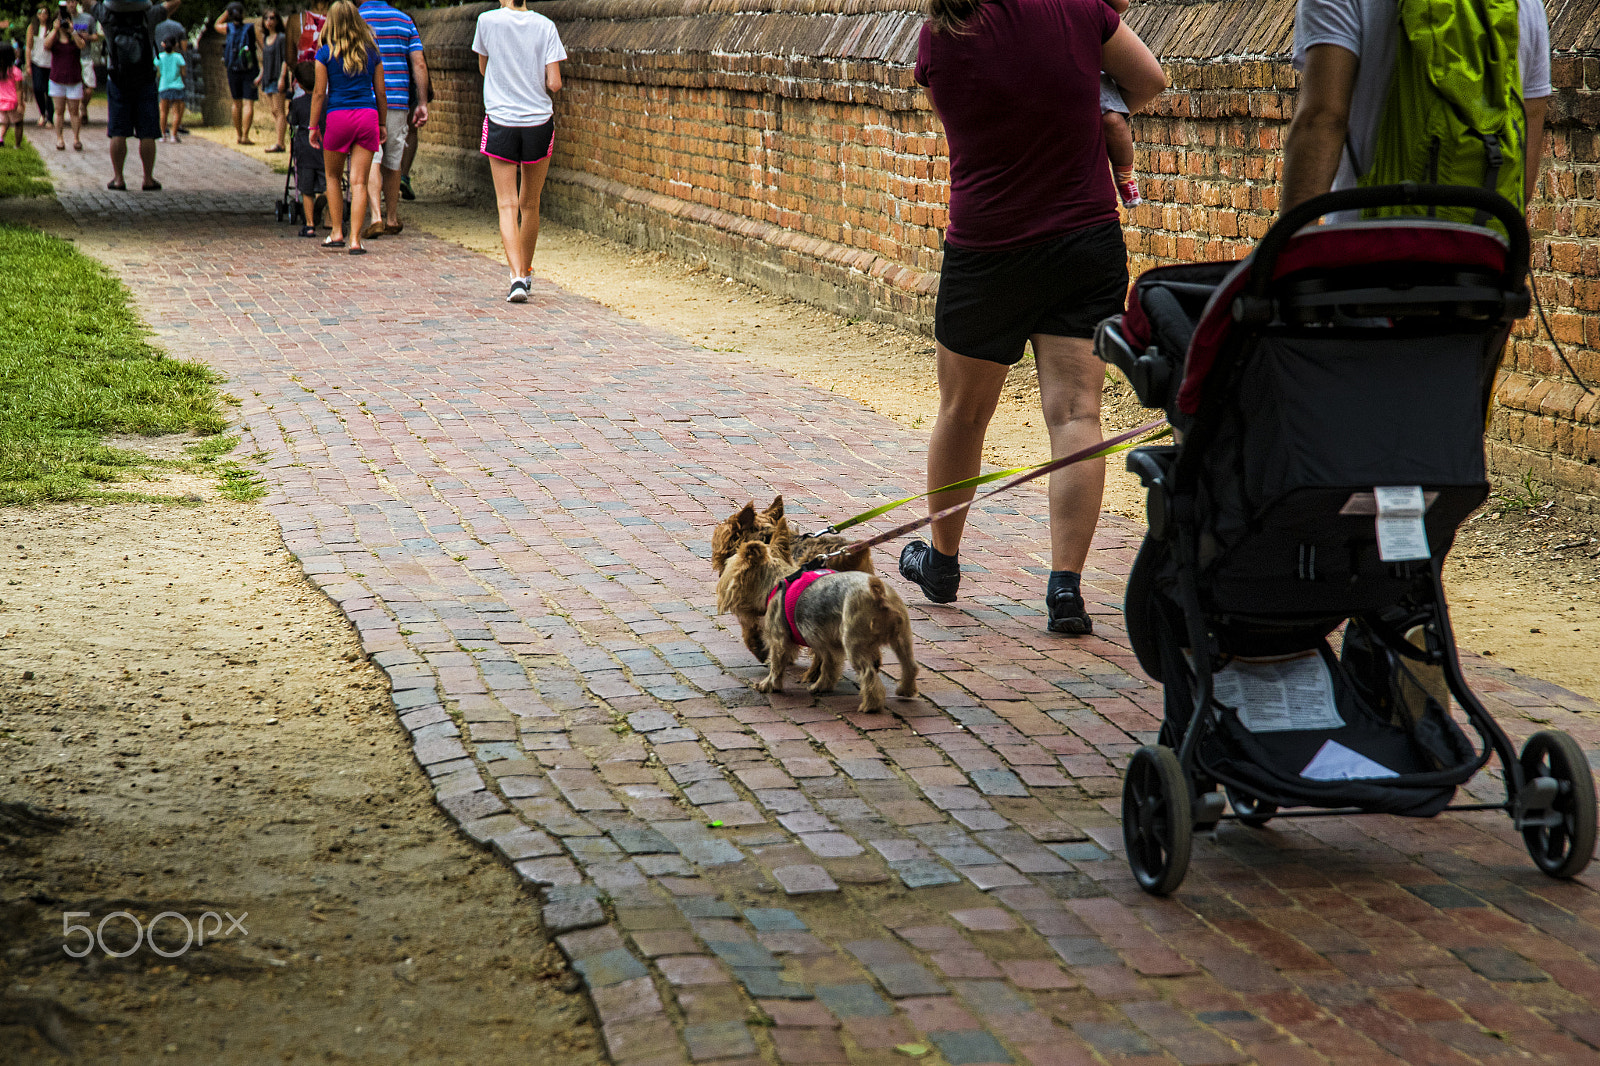 Canon EOS-1D X Mark II + Sigma 24-105mm f/4 DG OS HSM | A sample photo. Two dogs pulling a baby stroller 11574t photography